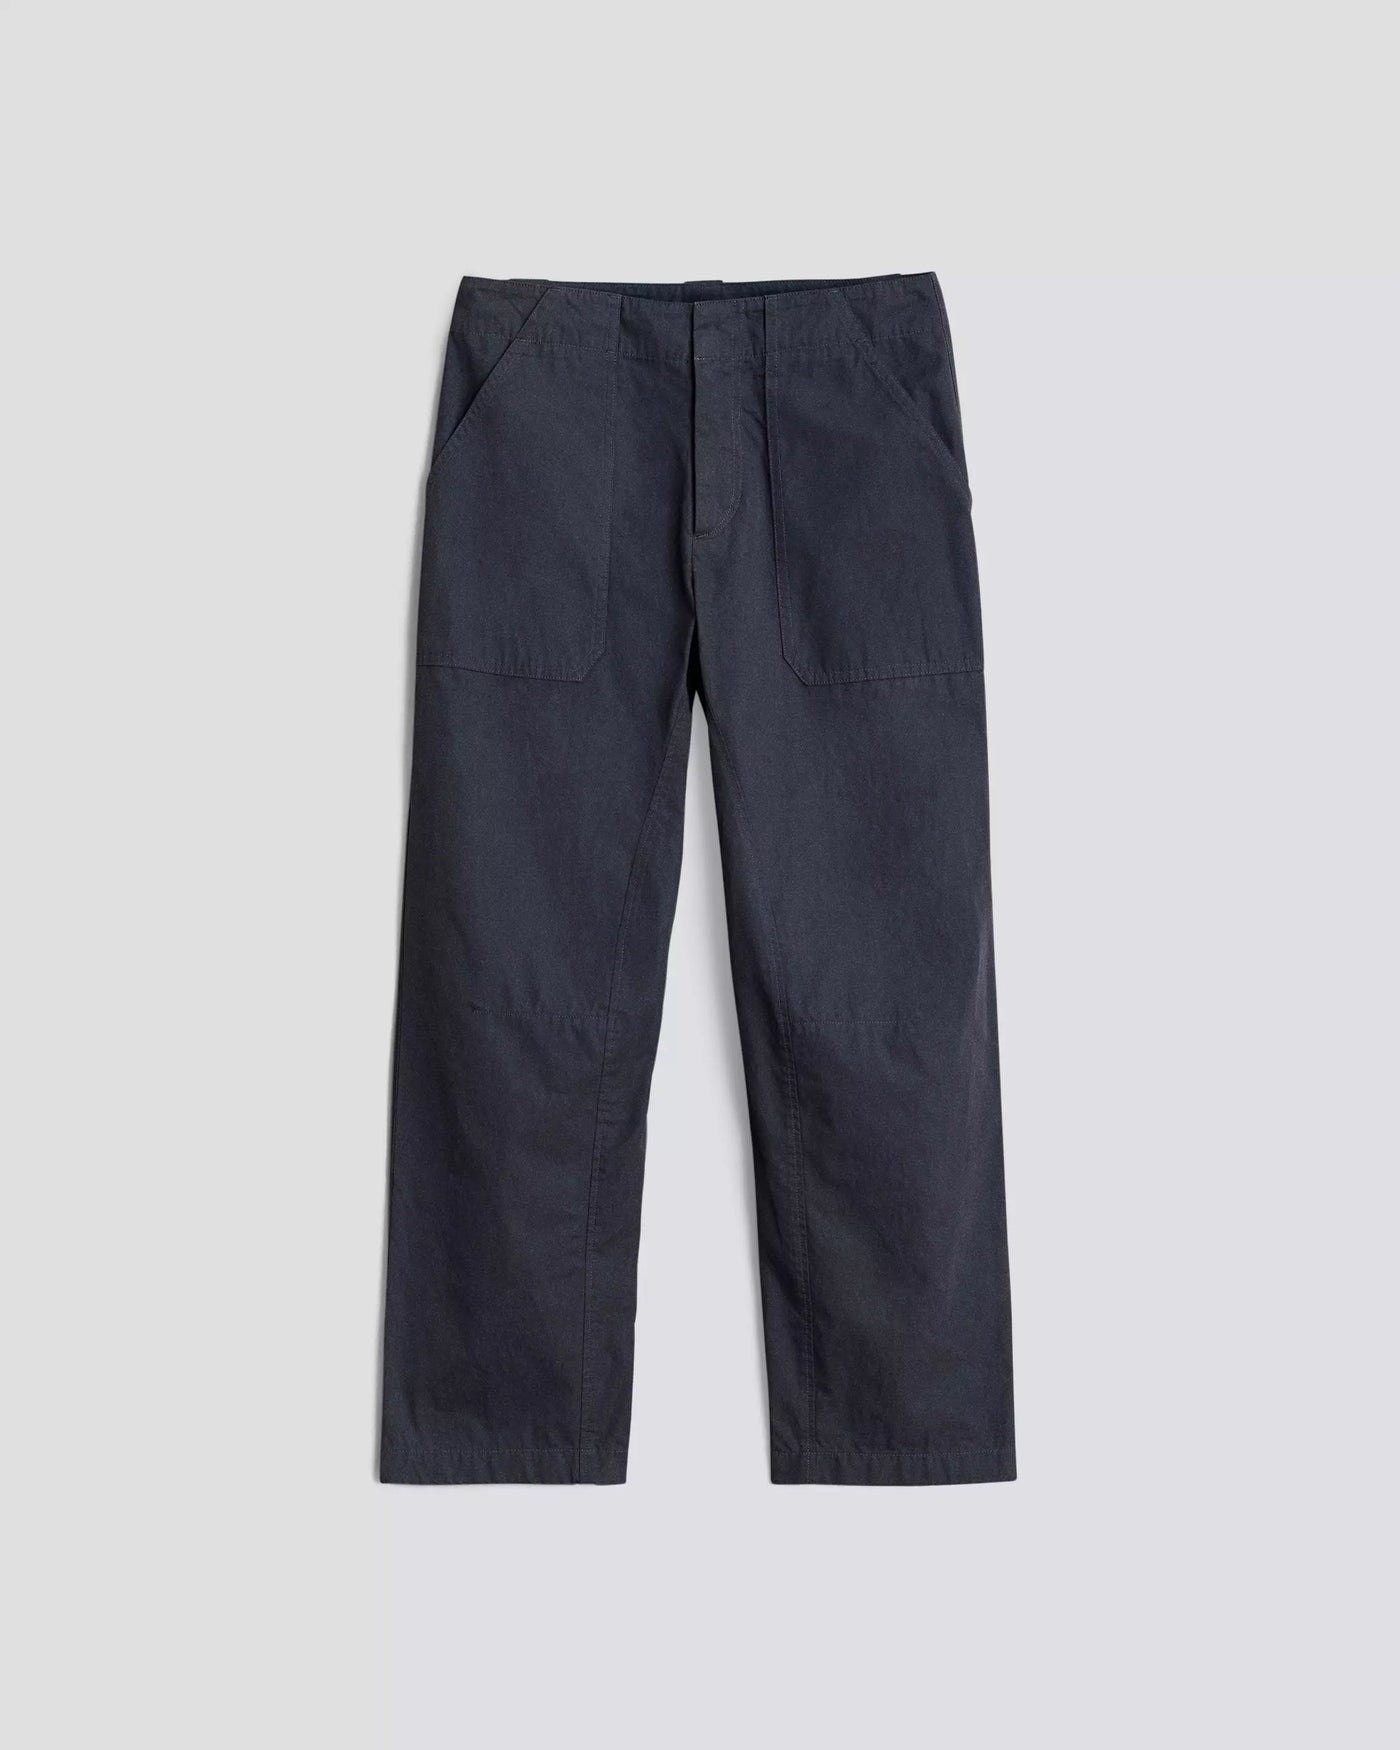 LEYTON WORKWEAR PANT IN SALUTE - Romi Boutique